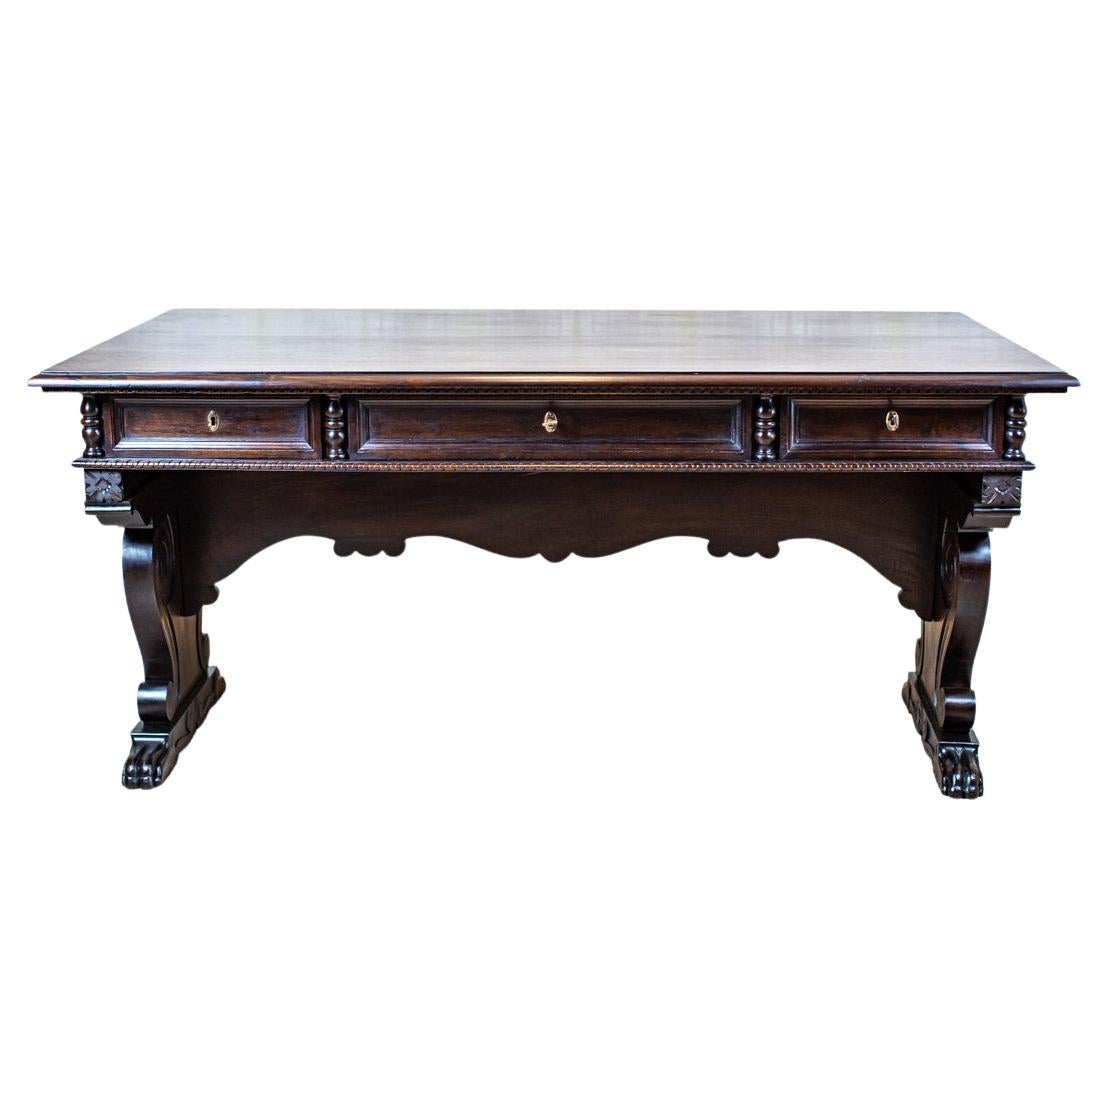 Massive Walnut Center Table from the Early 20th Century in Dark Brown